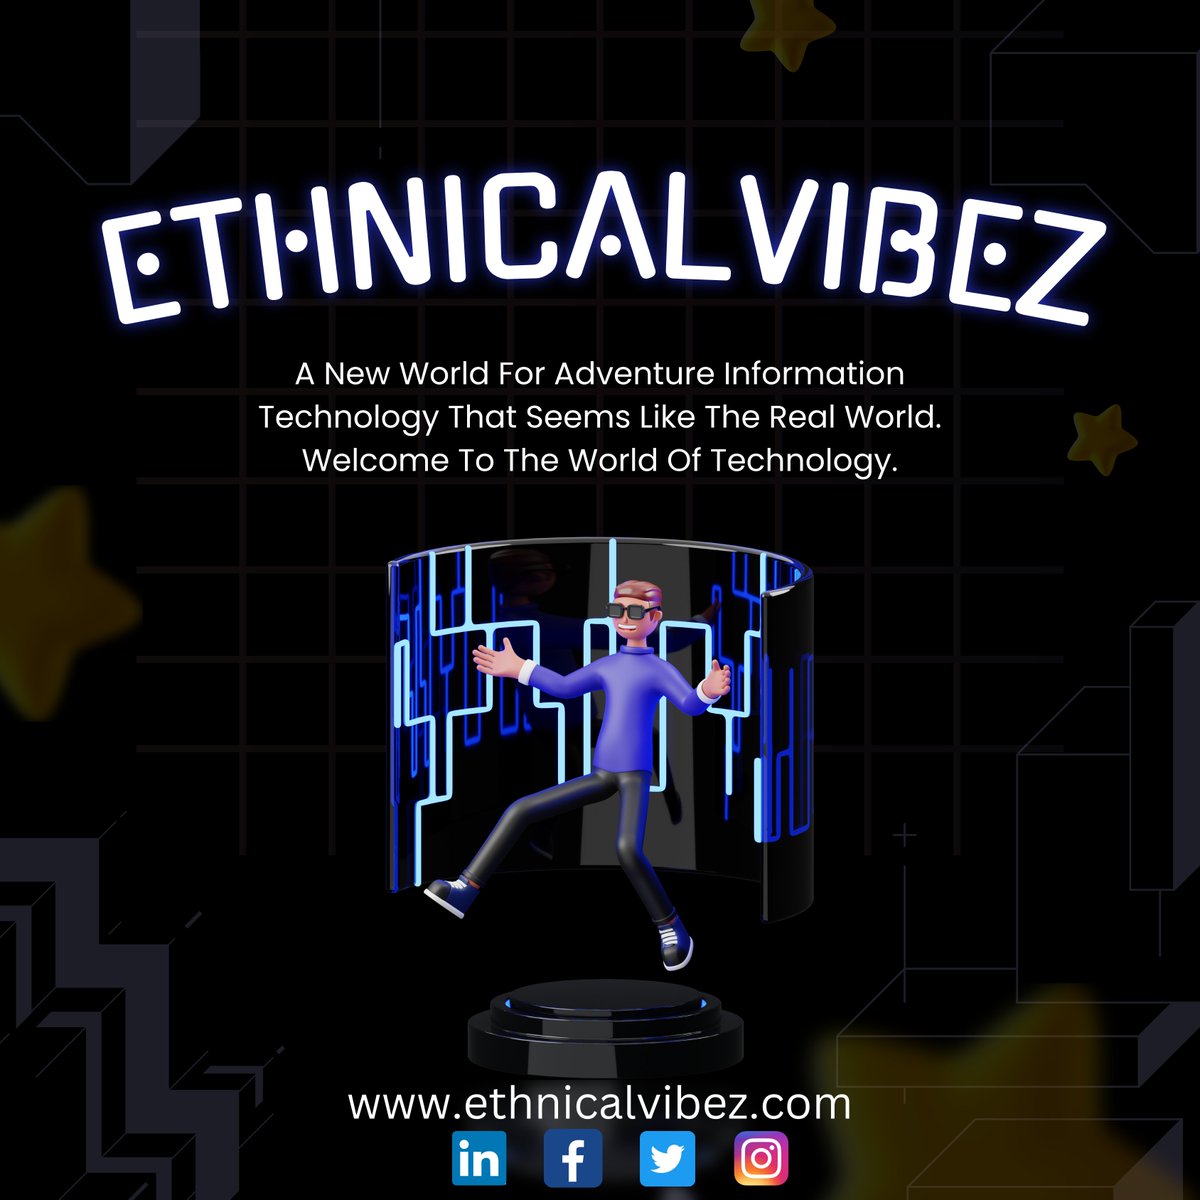 AT ETHNICALVIBEZ WE BUILD AND DEVELOP DIGITAL MARKETING PLATFORMS FOR BUSINESSES ON ALL CORPORATE & SOCIAL LEVELS WITH THE FUSION OF PROMOTIONS AND BUSINESS DEVELOPMENT.

#CanadianTech #TechCanada #CDNTech #TechTO #TorontoTech #VanTech #YVRtech